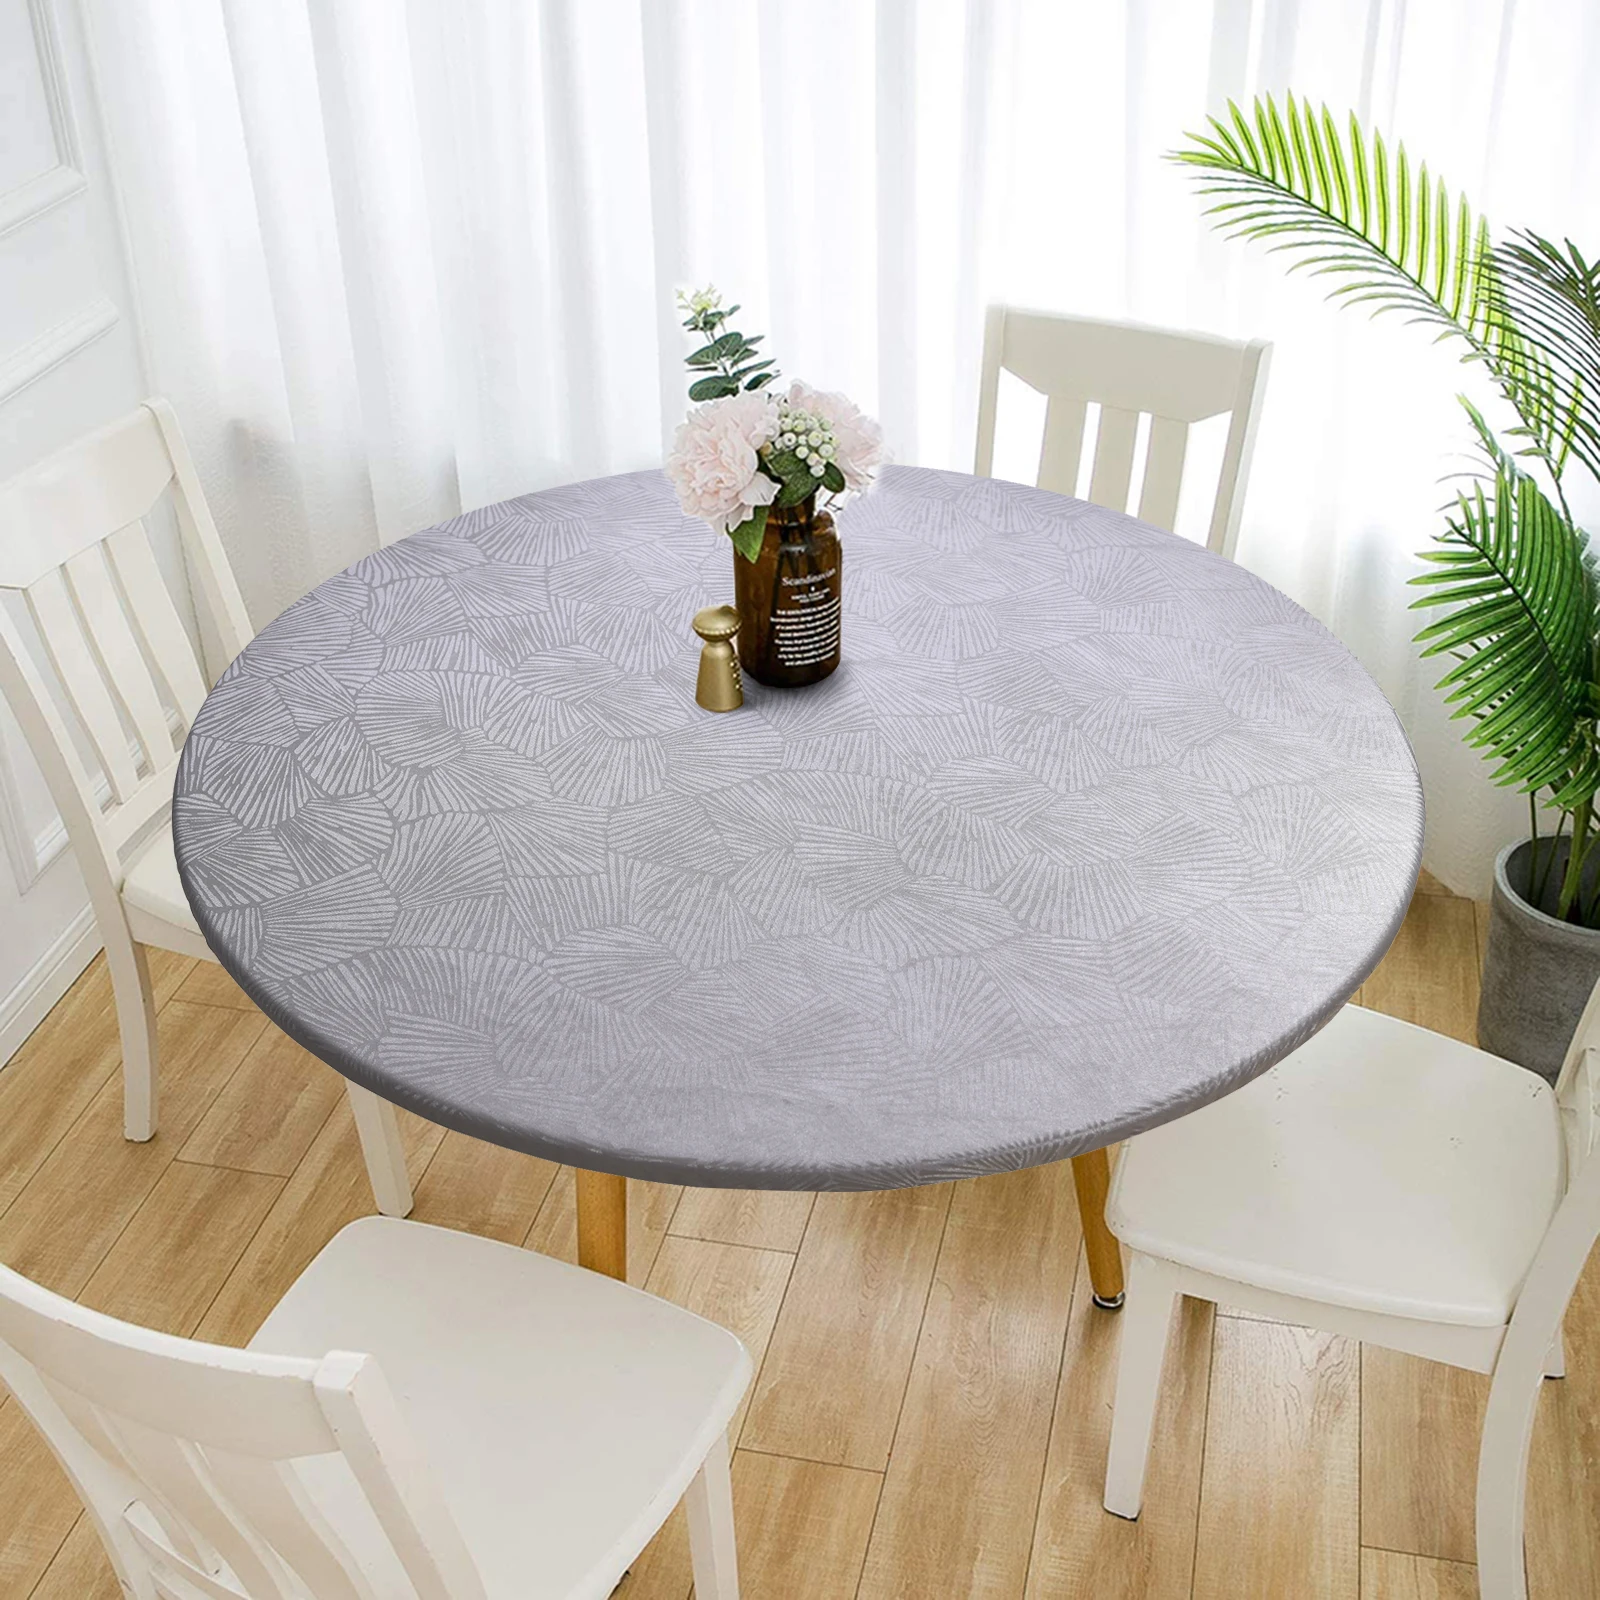 Elastic Edged Vinyl Fitted Tablecloth Indoor Outdoor Round Cocktail Table Cloth Flannel Backed Oil-proof Waterproof Wipeable